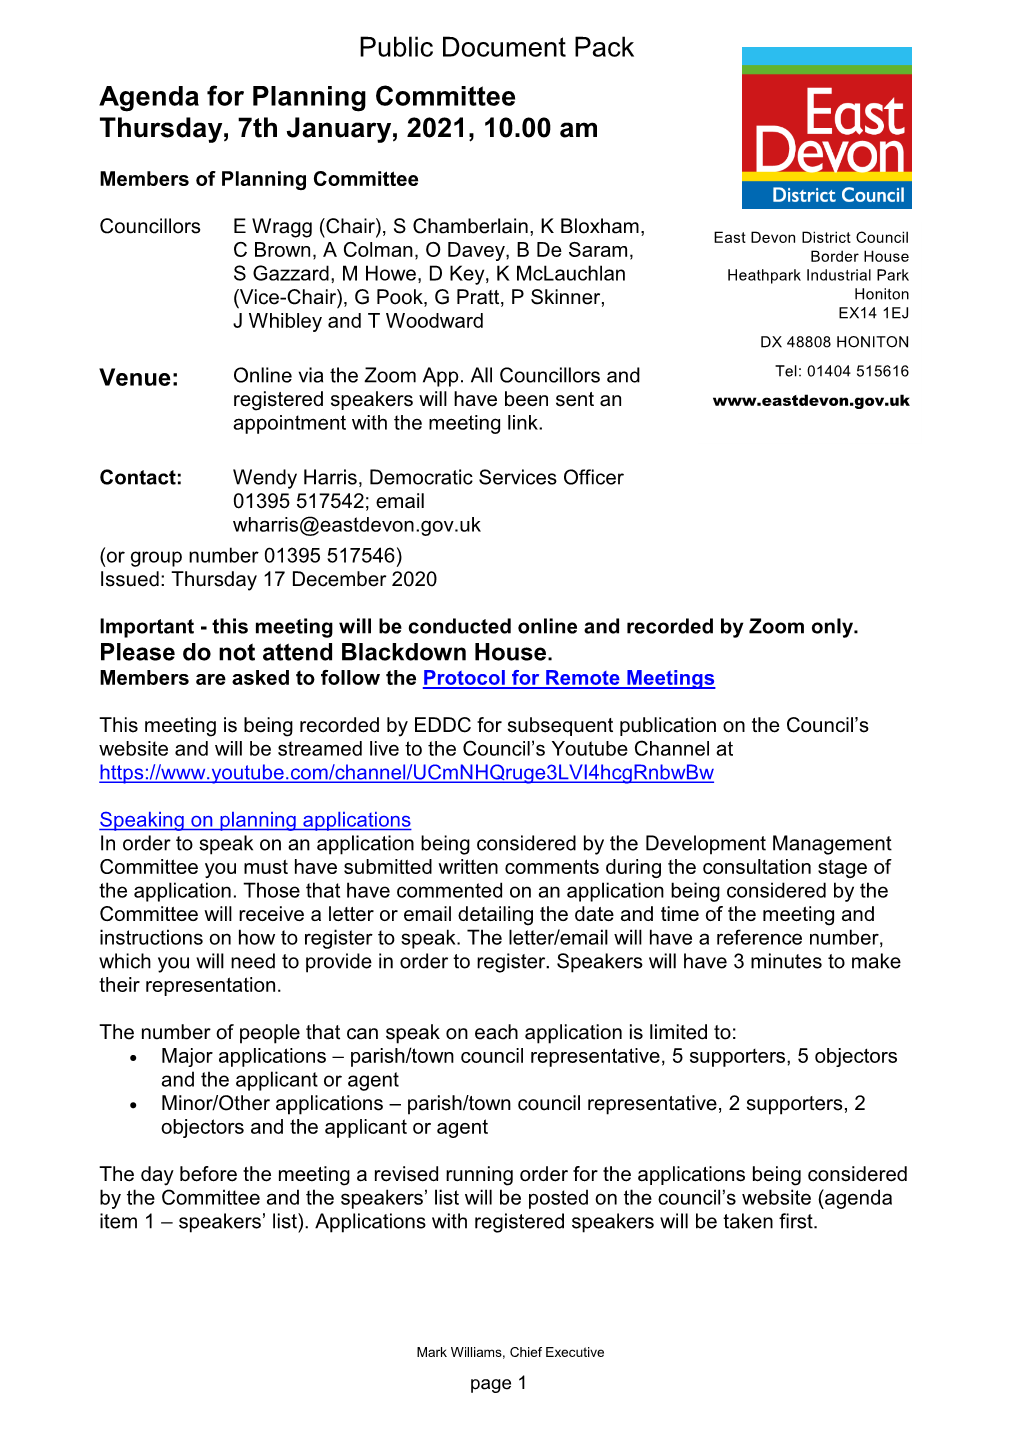 Agenda Document for Planning Committee, 07/01/2021 10:00